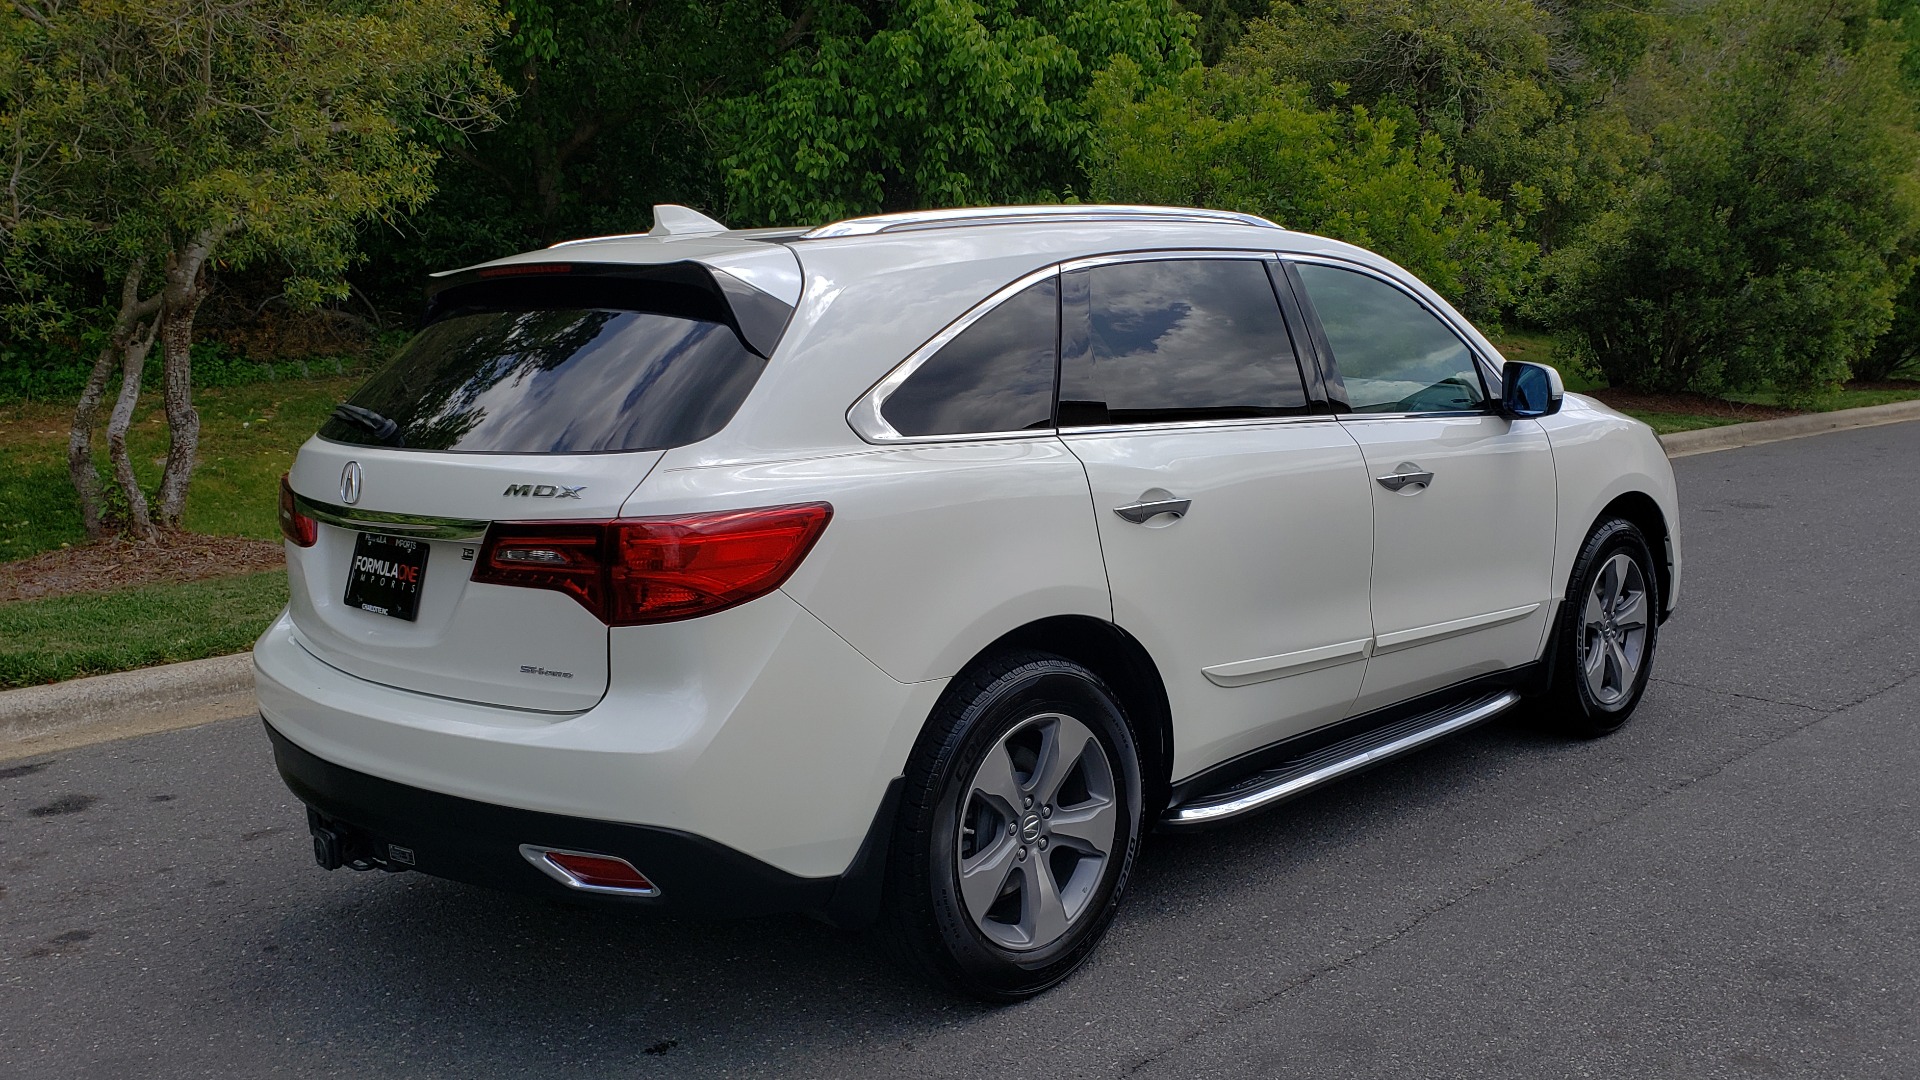 Used 2014 Acura MDX AWD / NAV / SUNROOF / 3-ROW / REARVIEW / PREMIUM SND for sale Sold at Formula Imports in Charlotte NC 28227 6